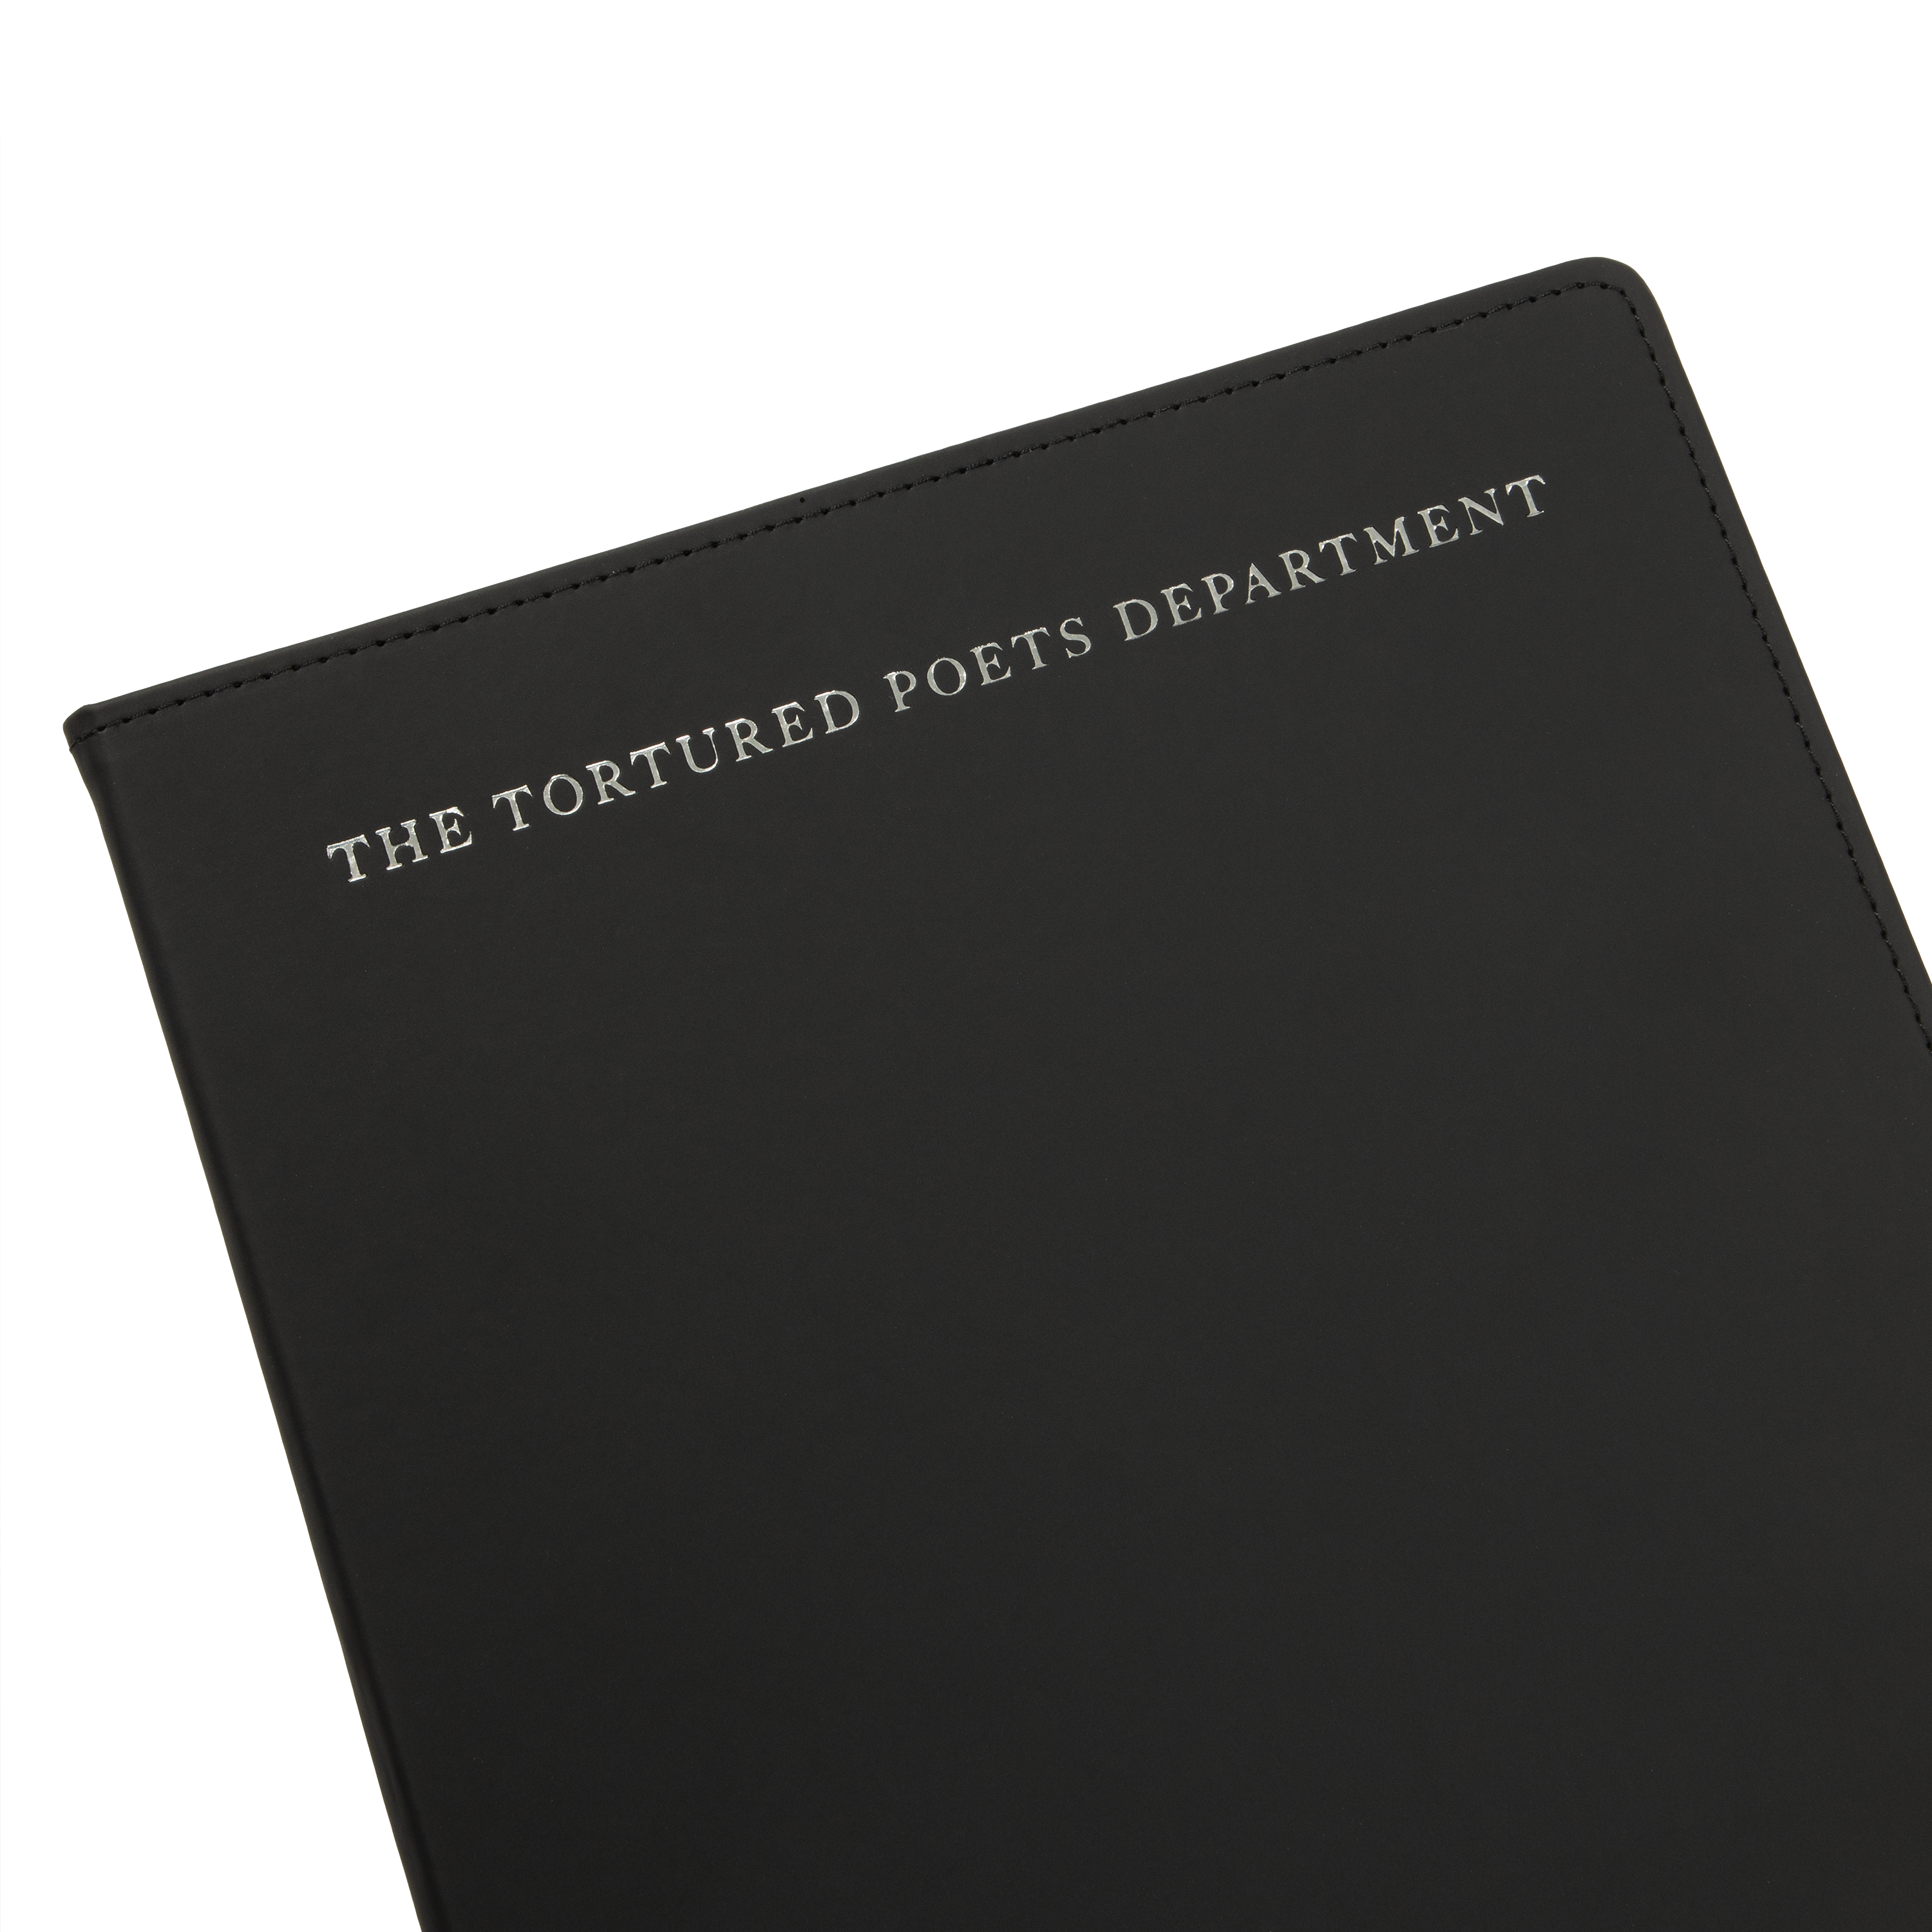 The Tortured Poets Department Journal